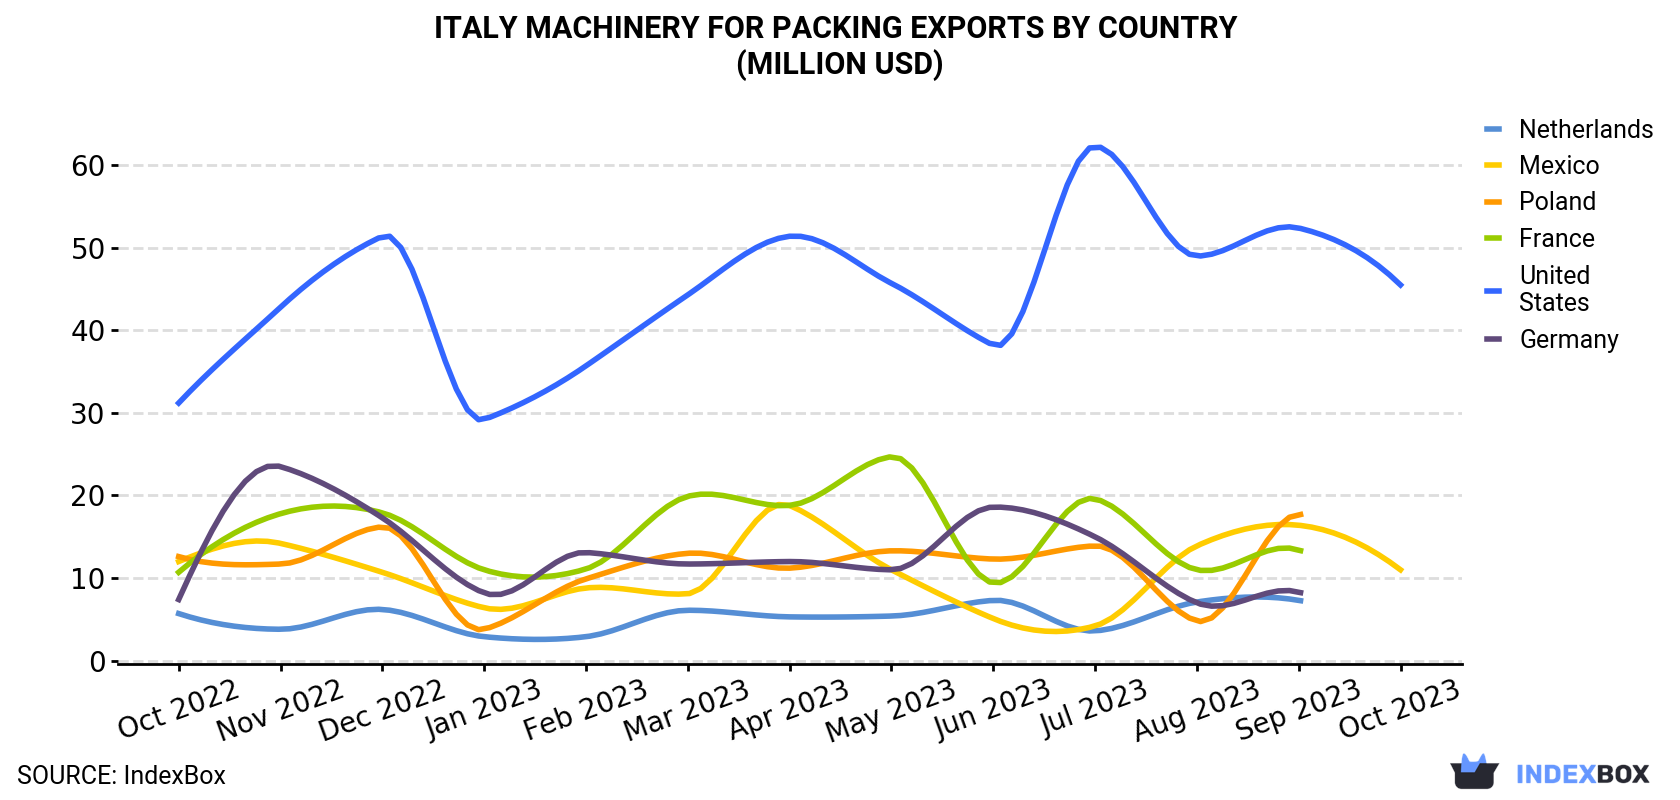 Italy Machinery For Packing Exports By Country (Million USD)